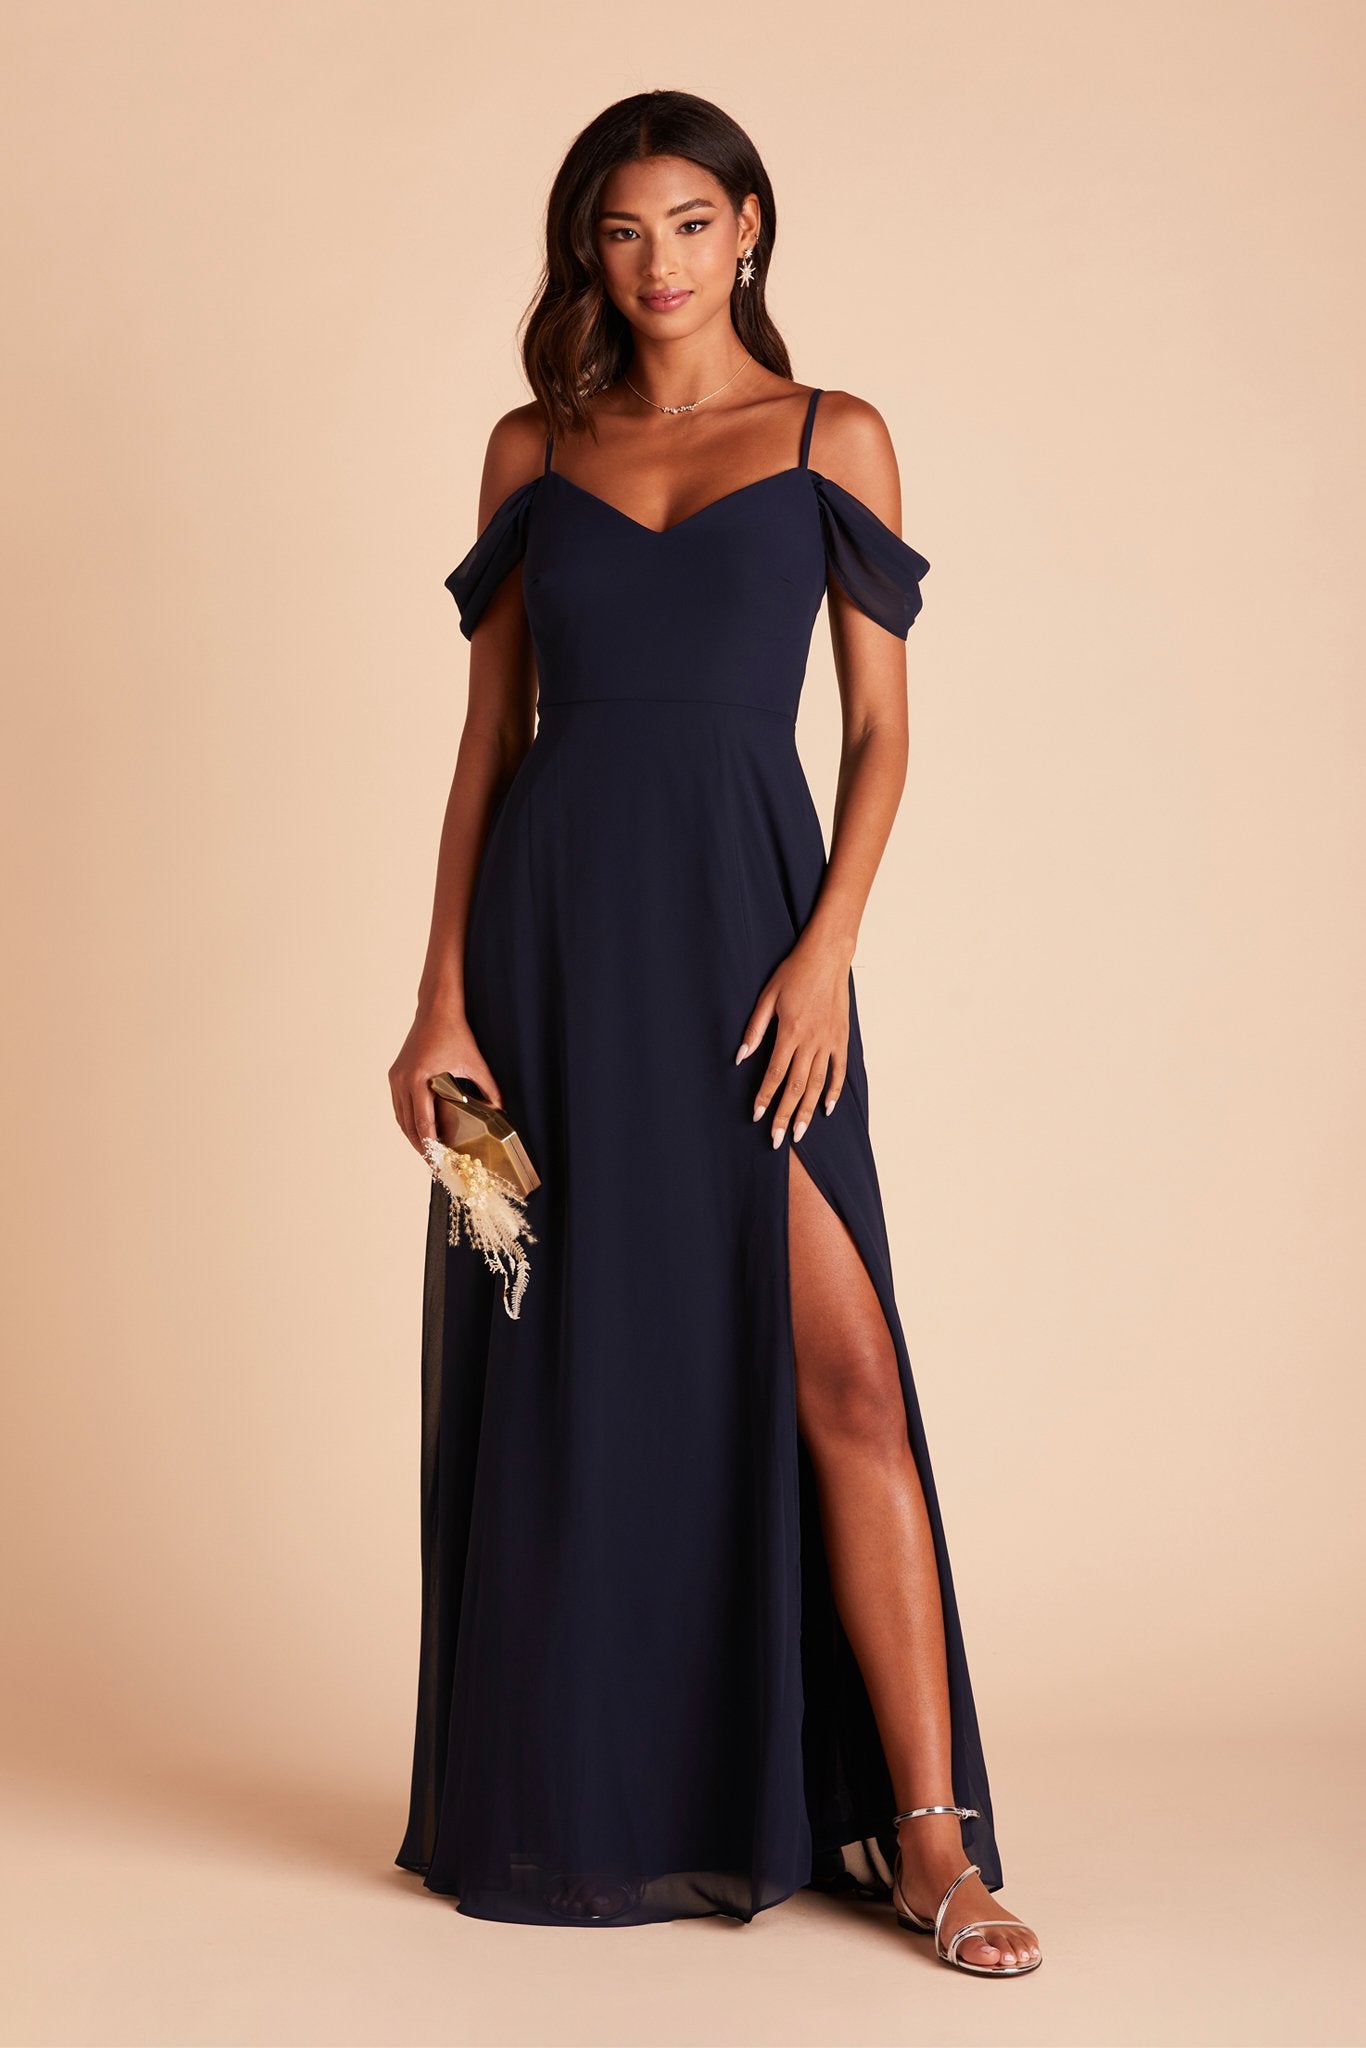 Devin convertible bridesmaid dress with slit in navy blue chiffon by Birdy Grey, front view